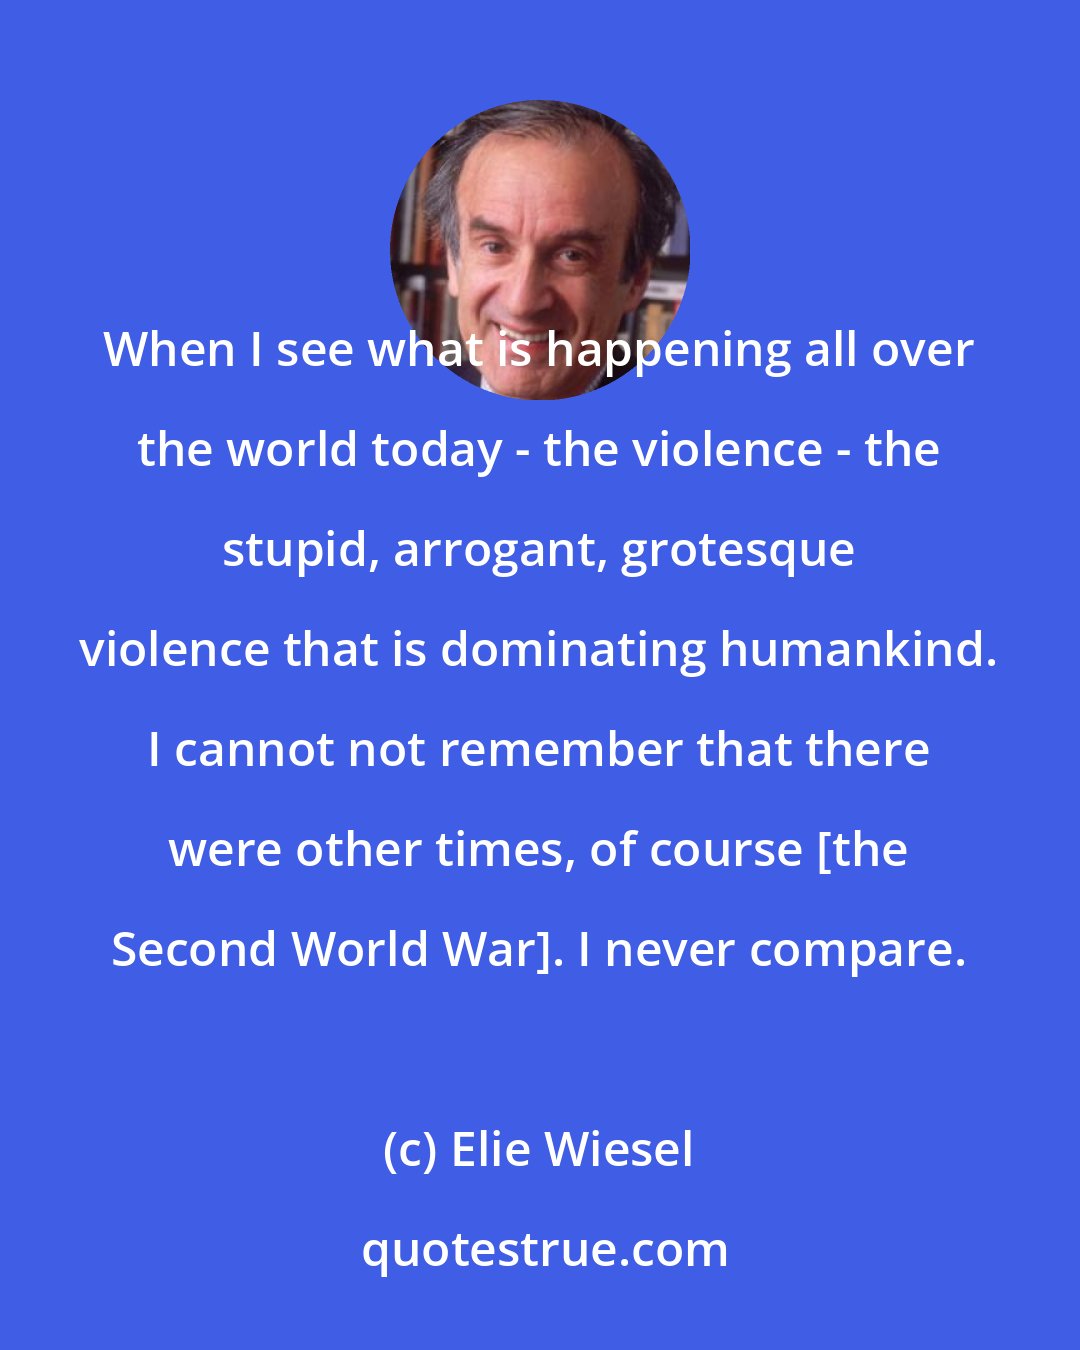 Elie Wiesel: When I see what is happening all over the world today - the violence - the stupid, arrogant, grotesque violence that is dominating humankind. I cannot not remember that there were other times, of course [the Second World War]. I never compare.